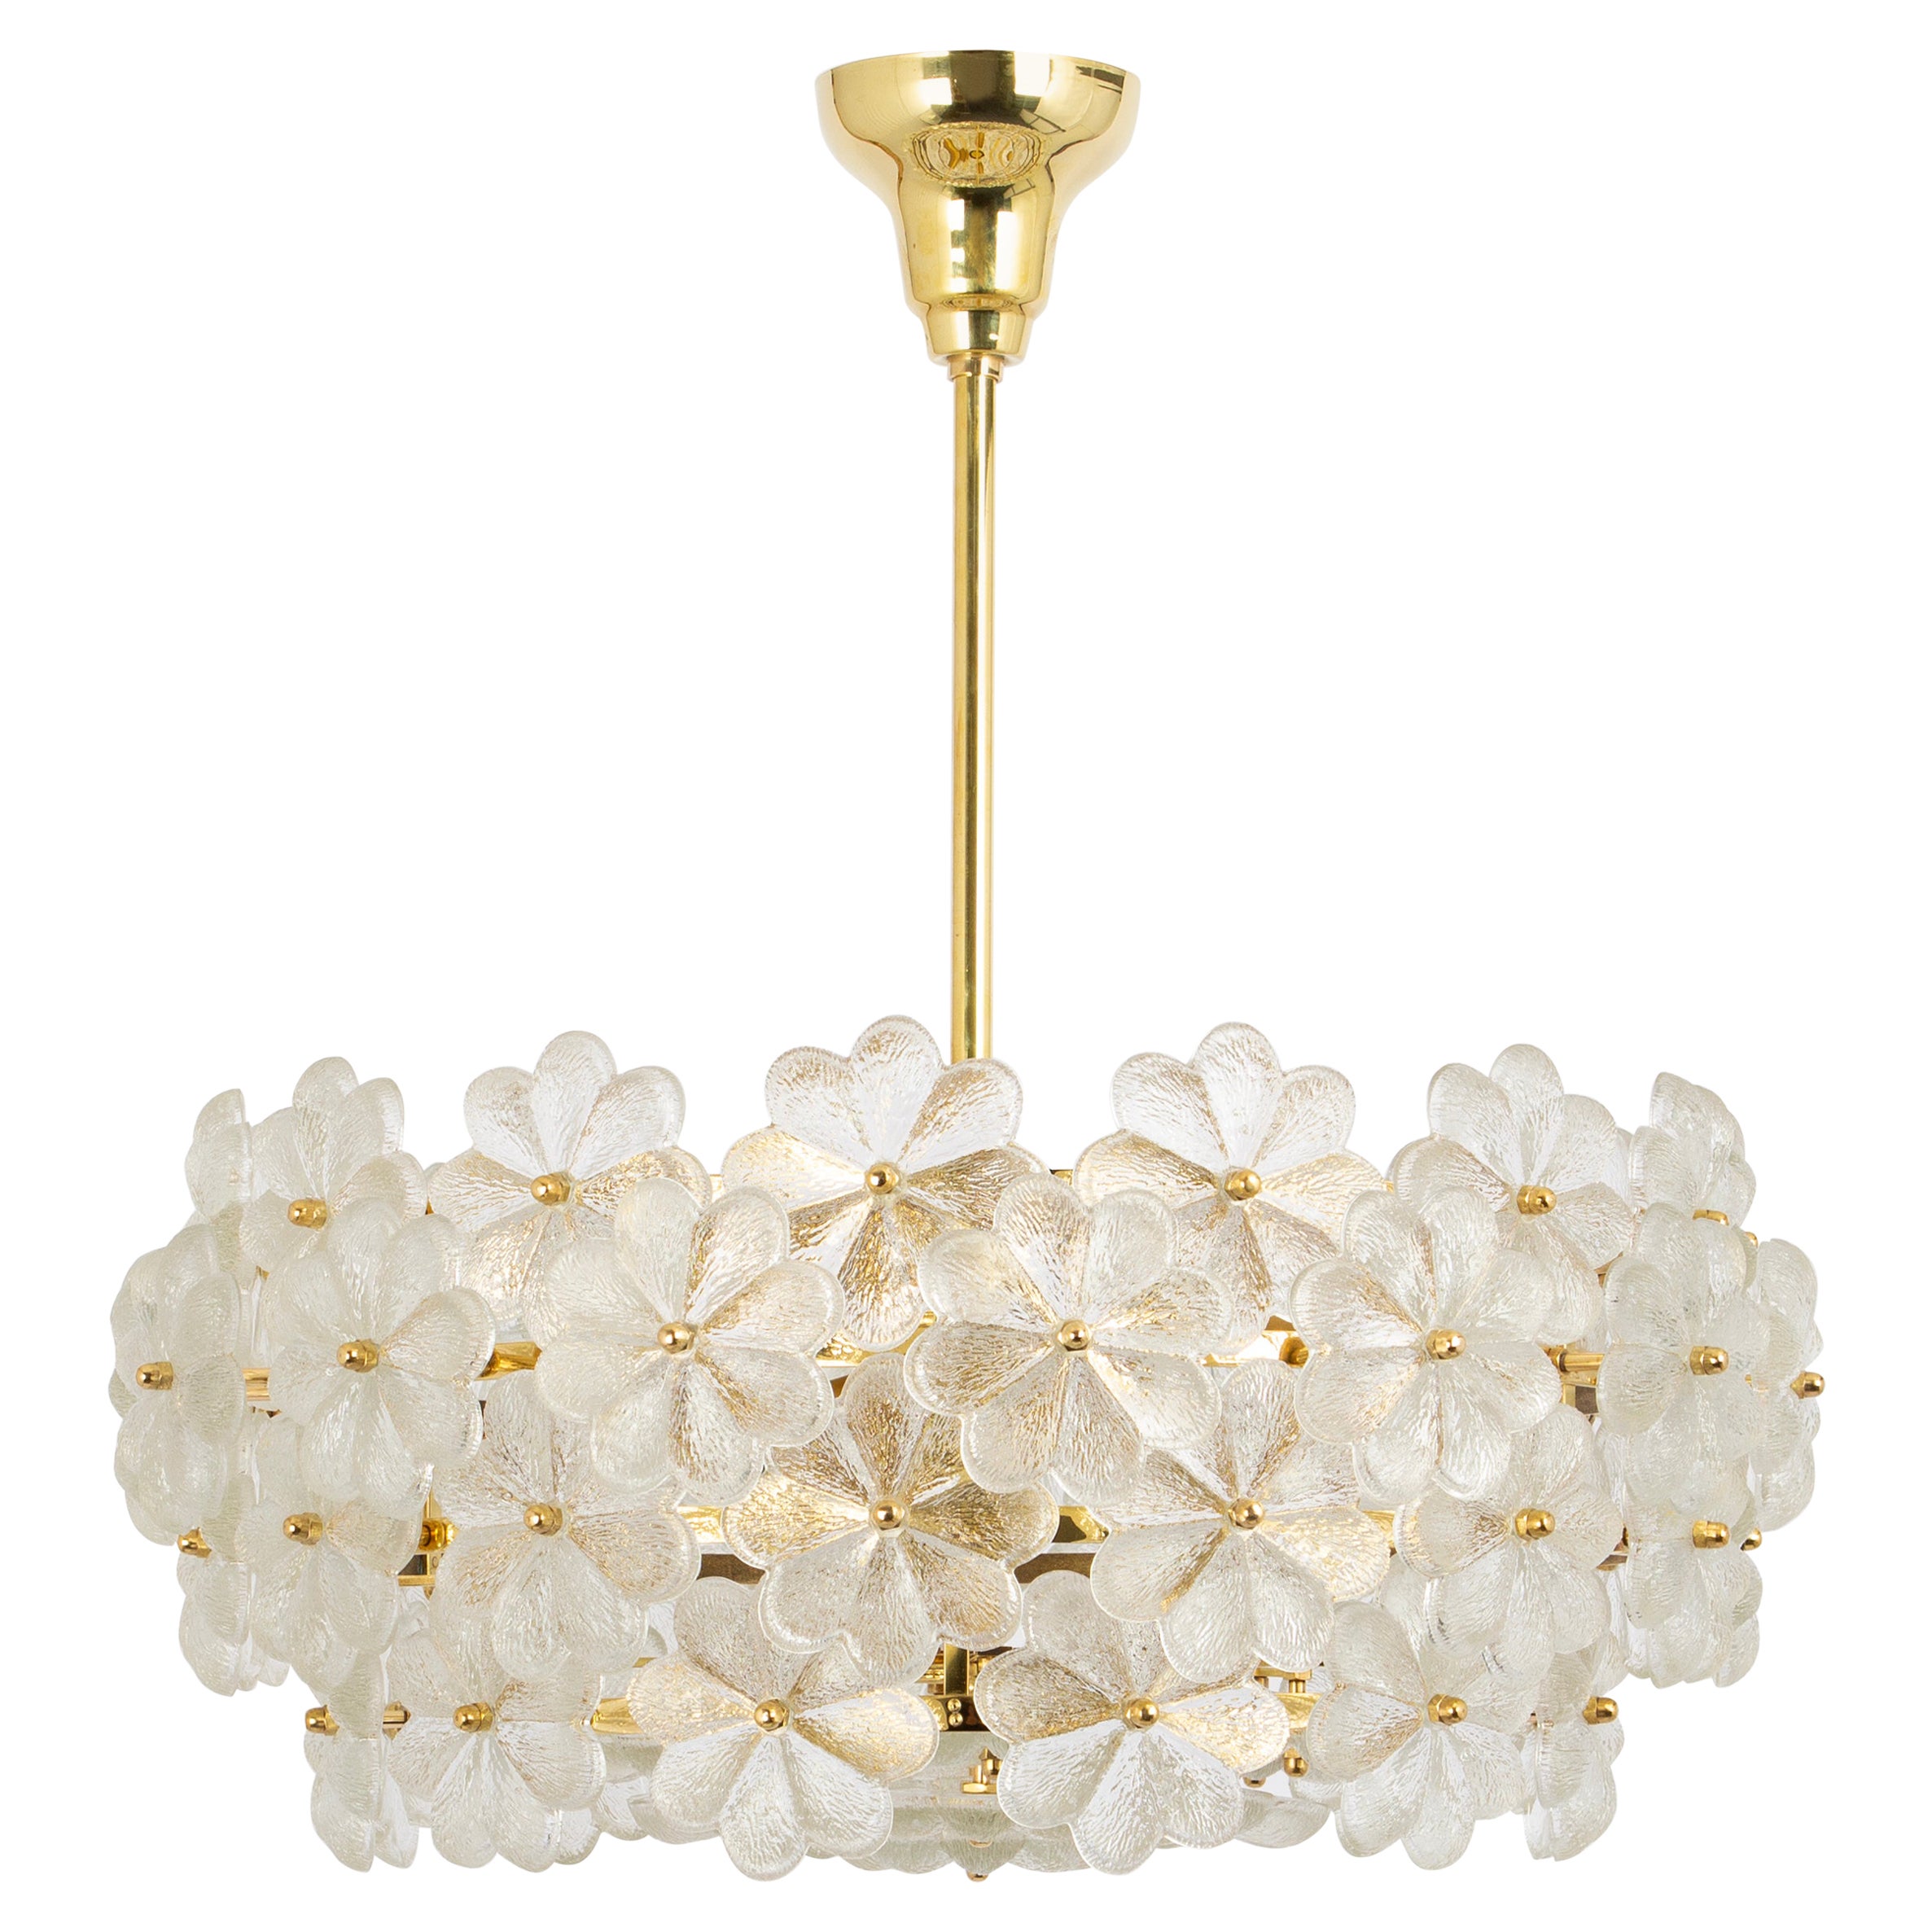 1 of 2 Stunning Murano Glass Chandelier by Ernst Palme, Germany, 1970s